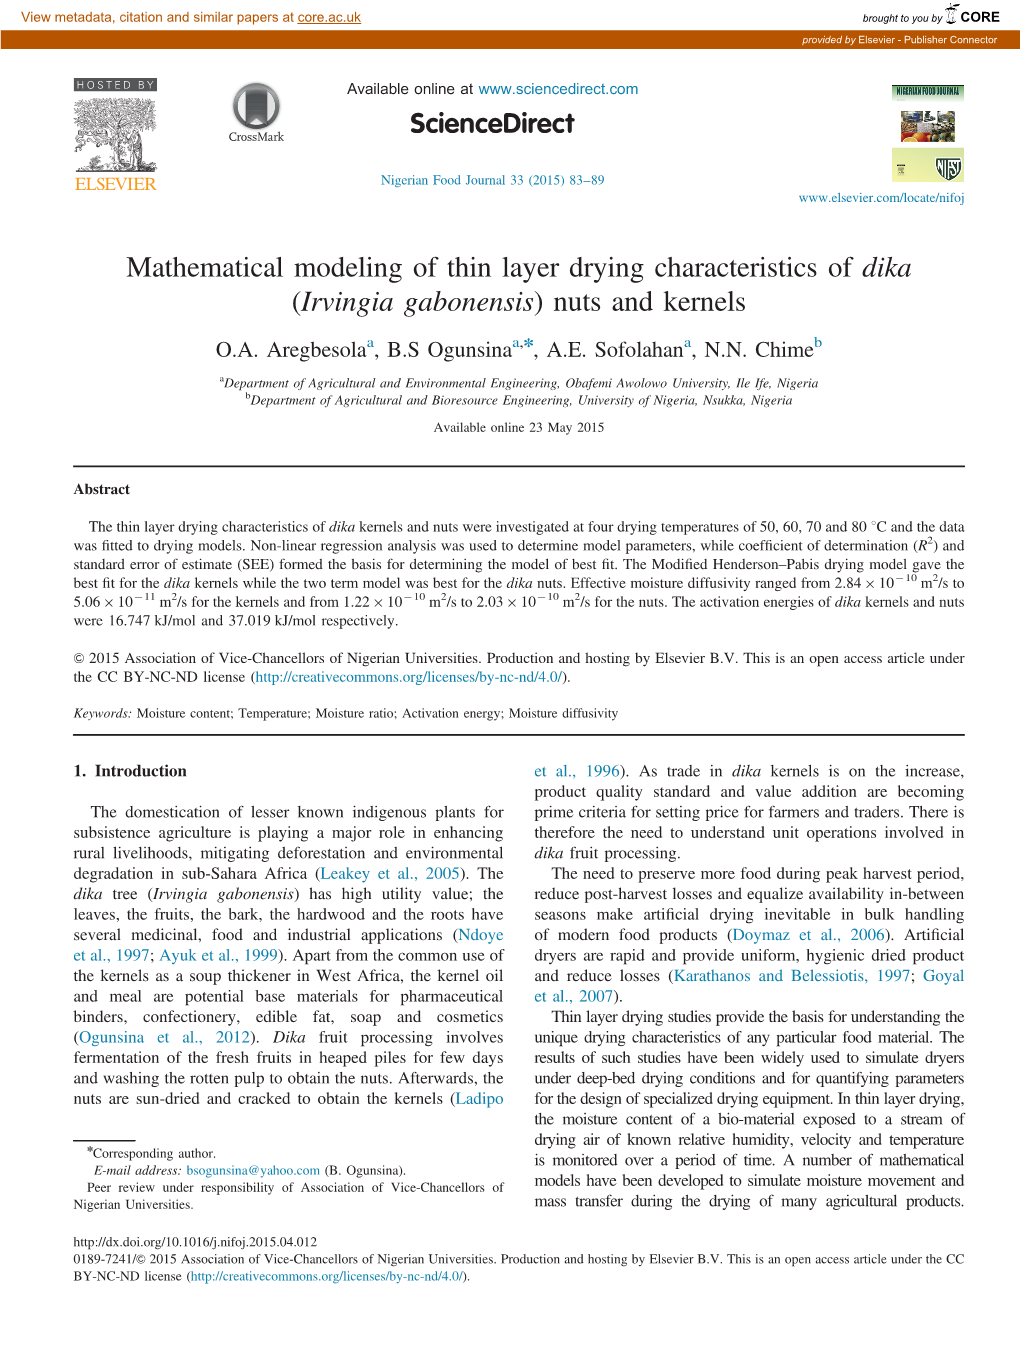 Mathematical Modeling of Thin Layer Drying Characteristics of Dika (Irvingia Gabonensis) Nuts and Kernels